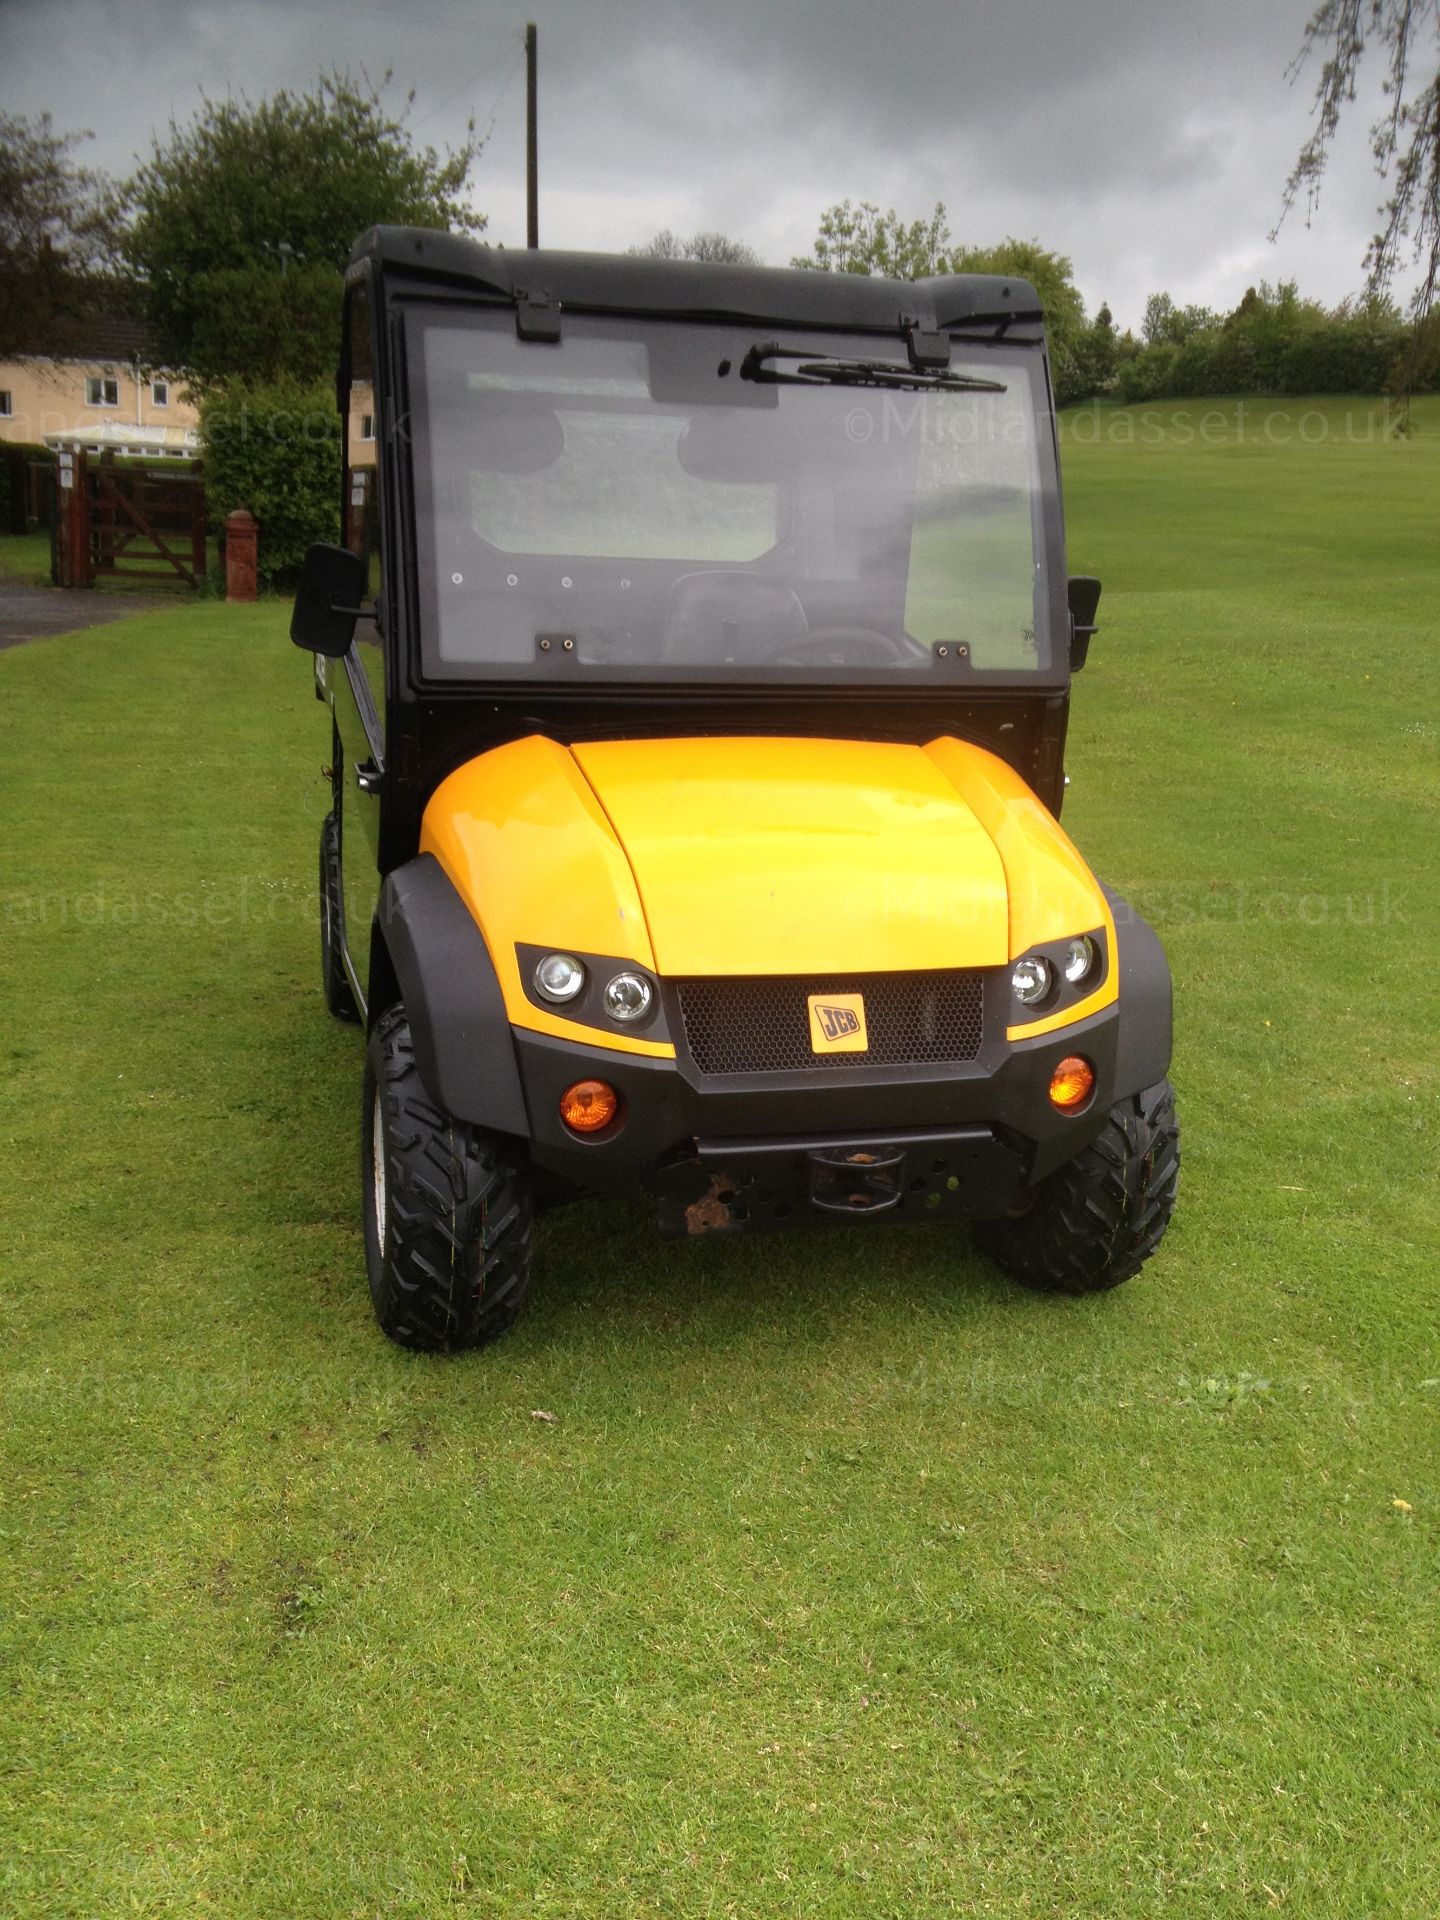 2012 JCB WORKMAX 800D UTILITY VEHICLE - Image 2 of 9